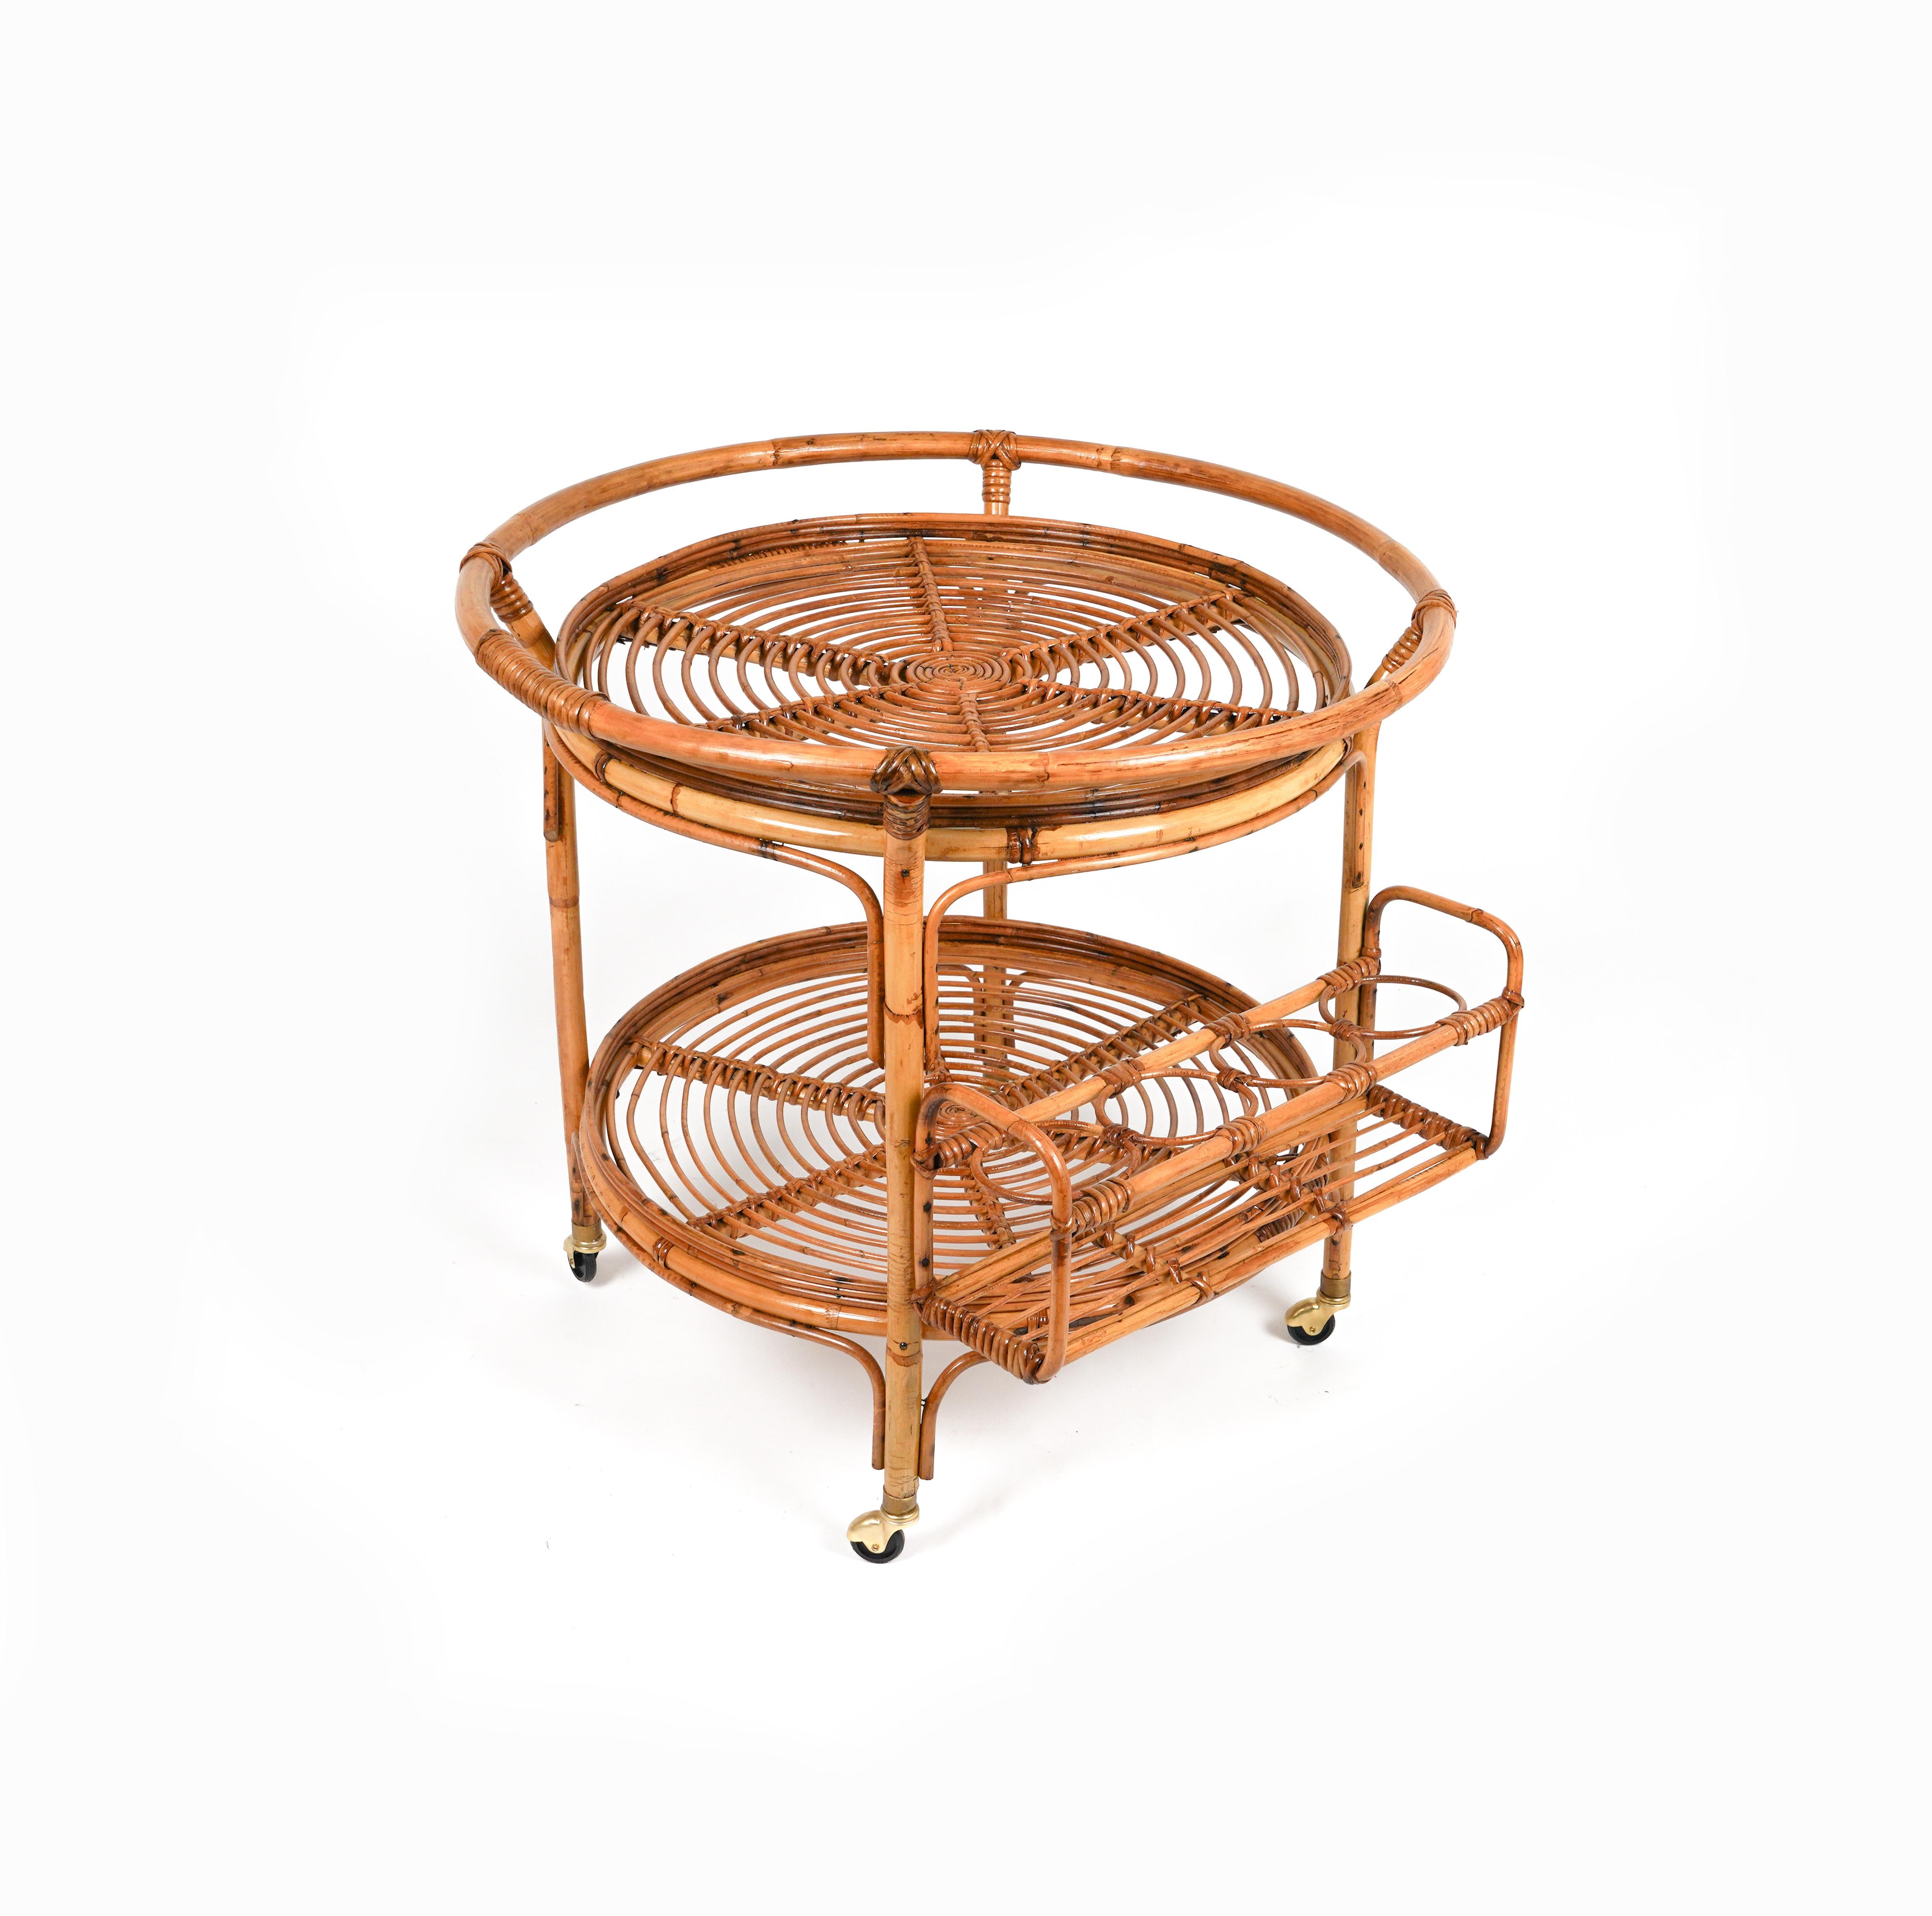 Midcentury Rattan and Bamboo Round Serving Bar Cart Trolley, Italy 1960s For Sale 3